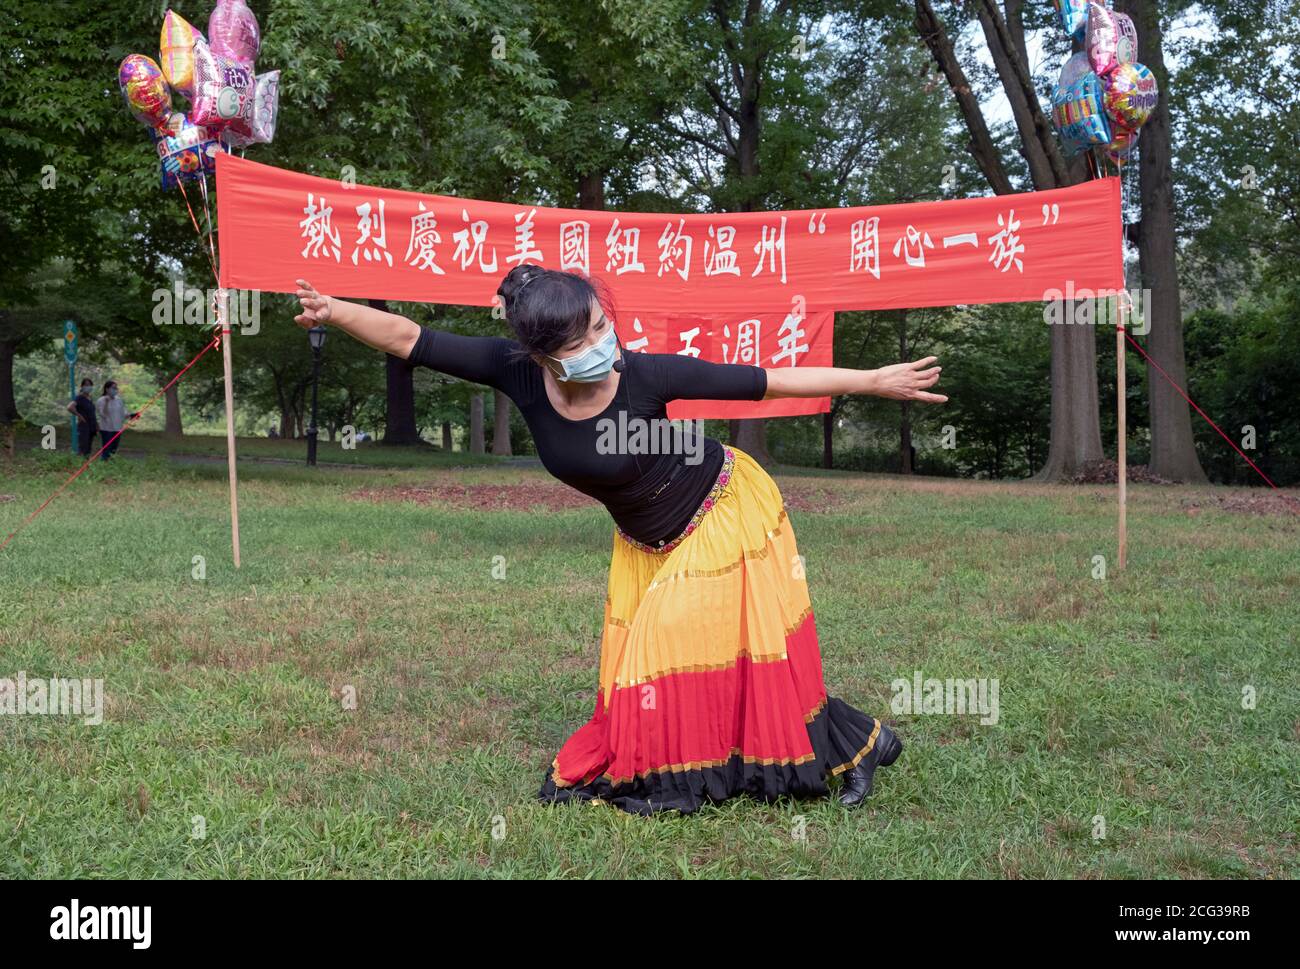 Posed portrait of the leader of a Chinese American dance group, the Wenzhou America New York troupe. At a park in Flushing, Queens, New York. Stock Photo